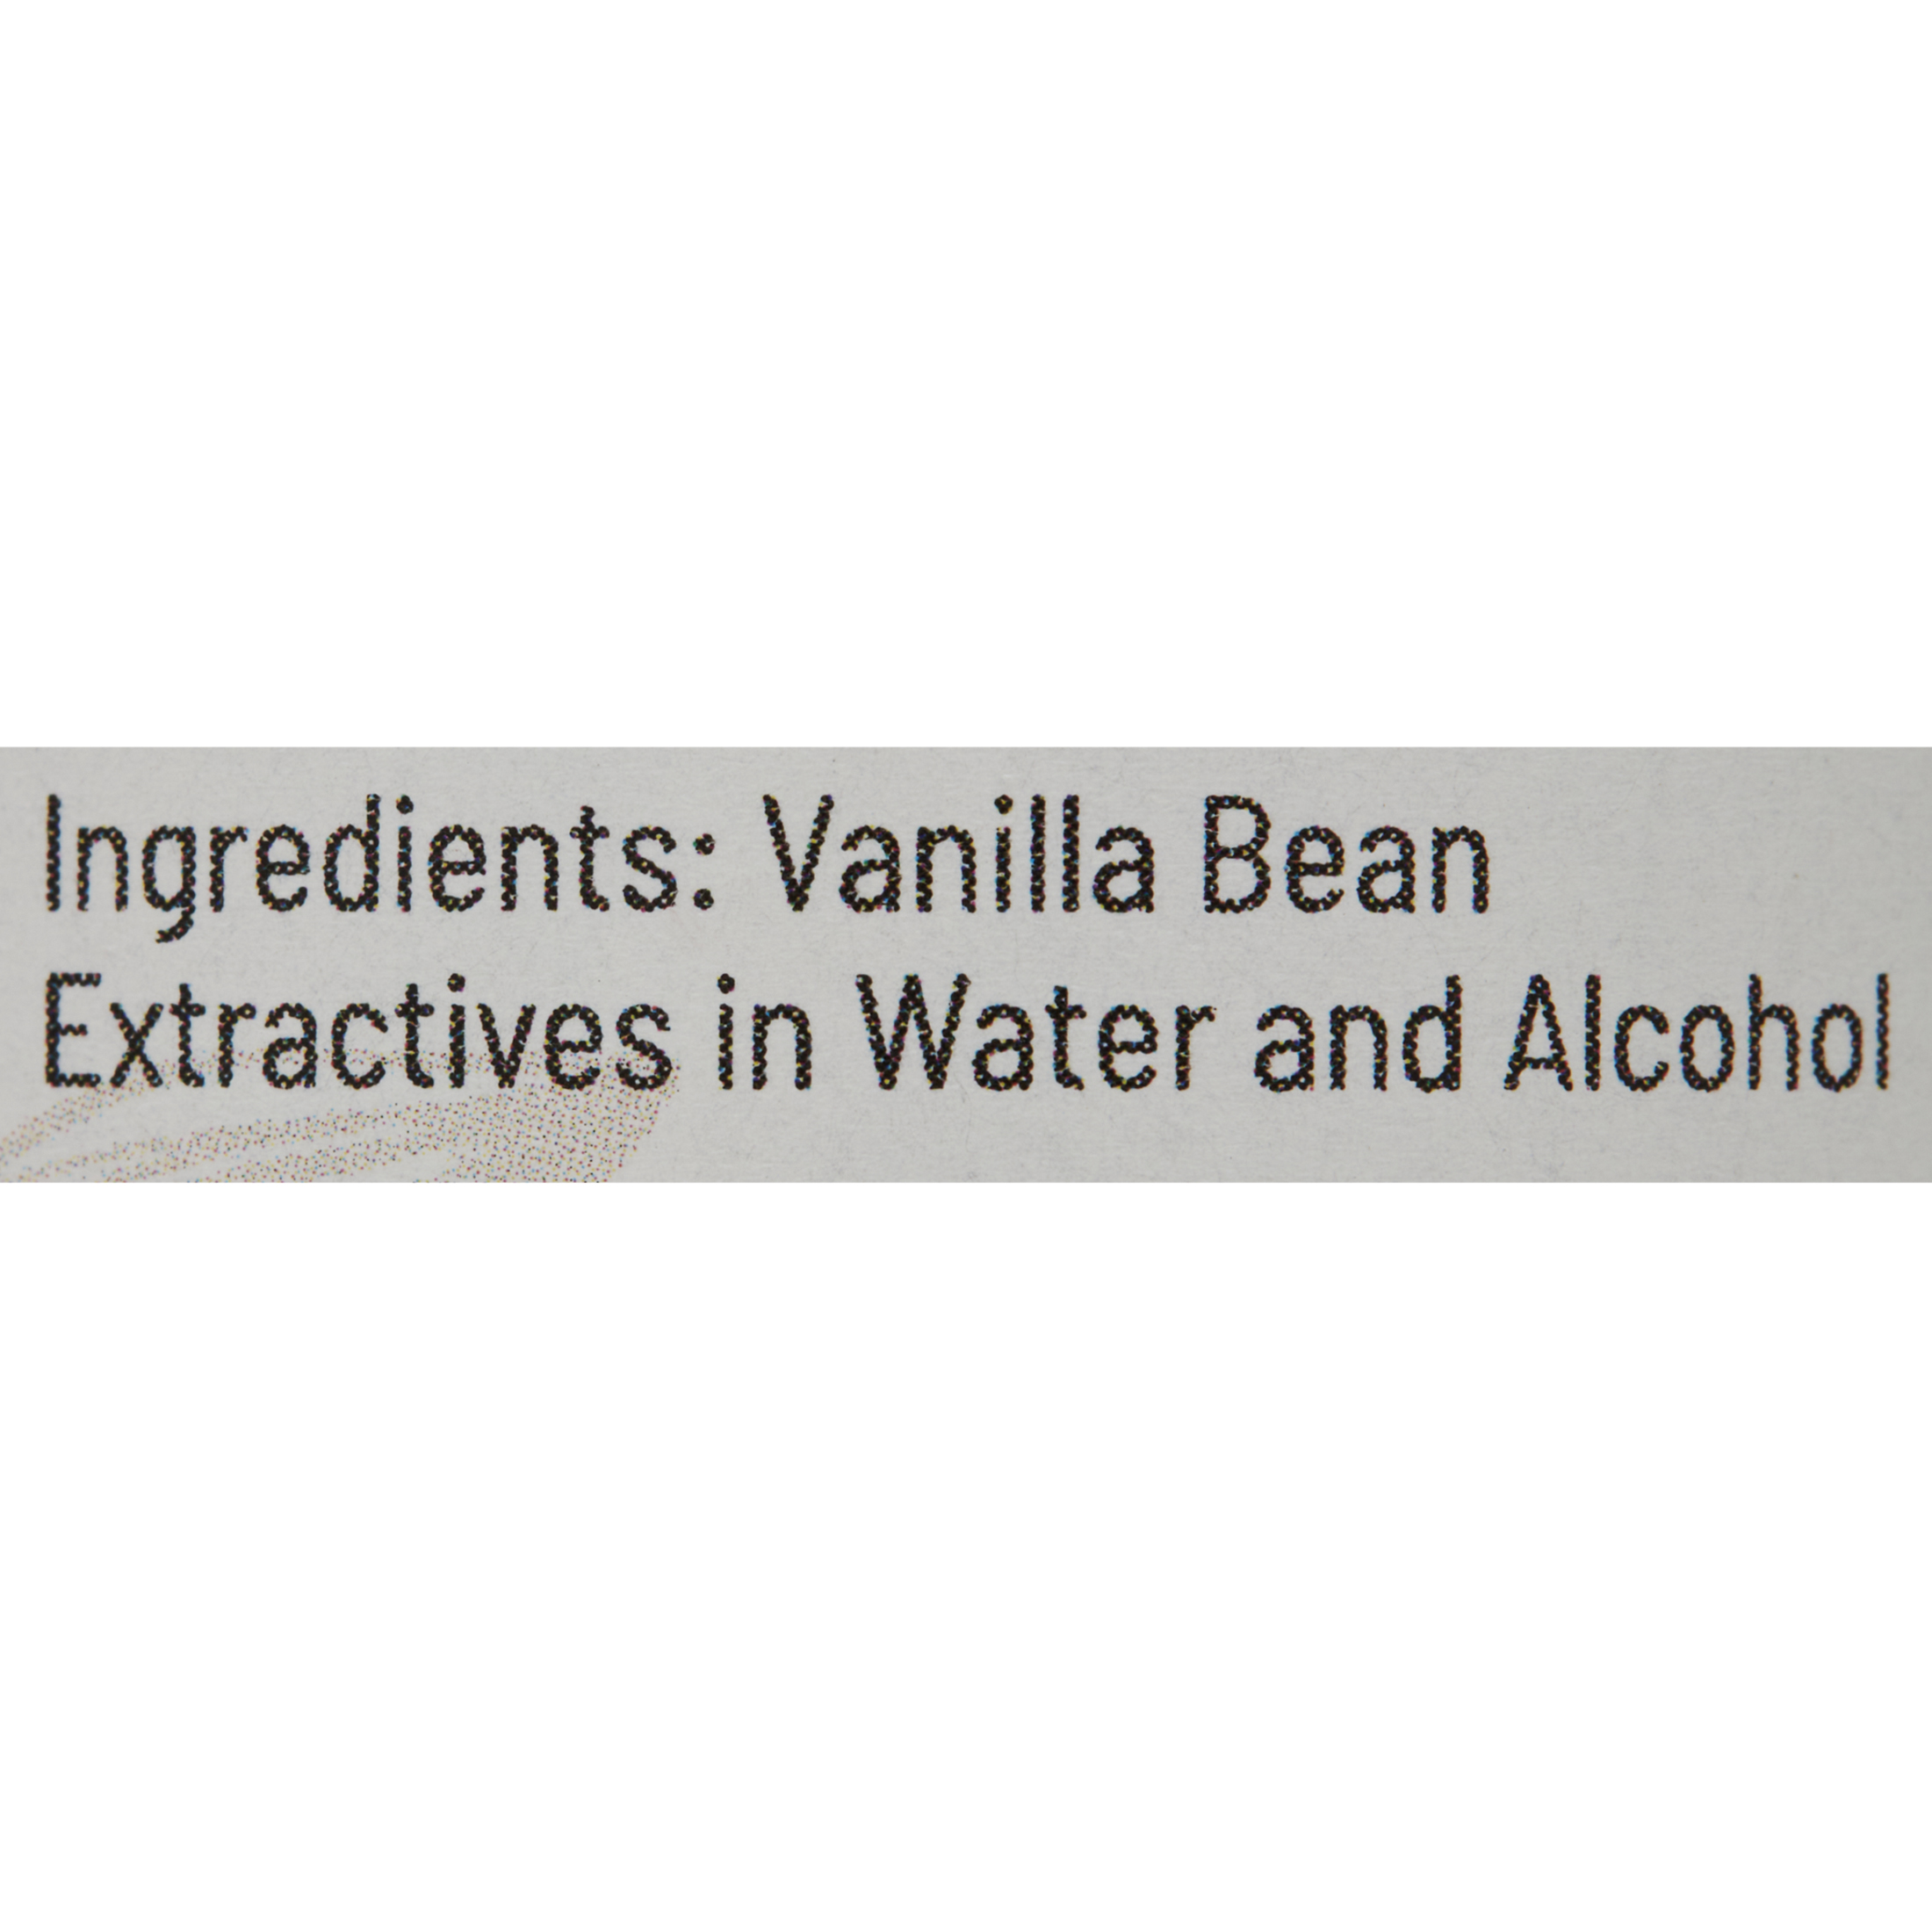 Rodelle Pure Vanilla Extract, 8 fl oz, Baking Extracts - image 2 of 4